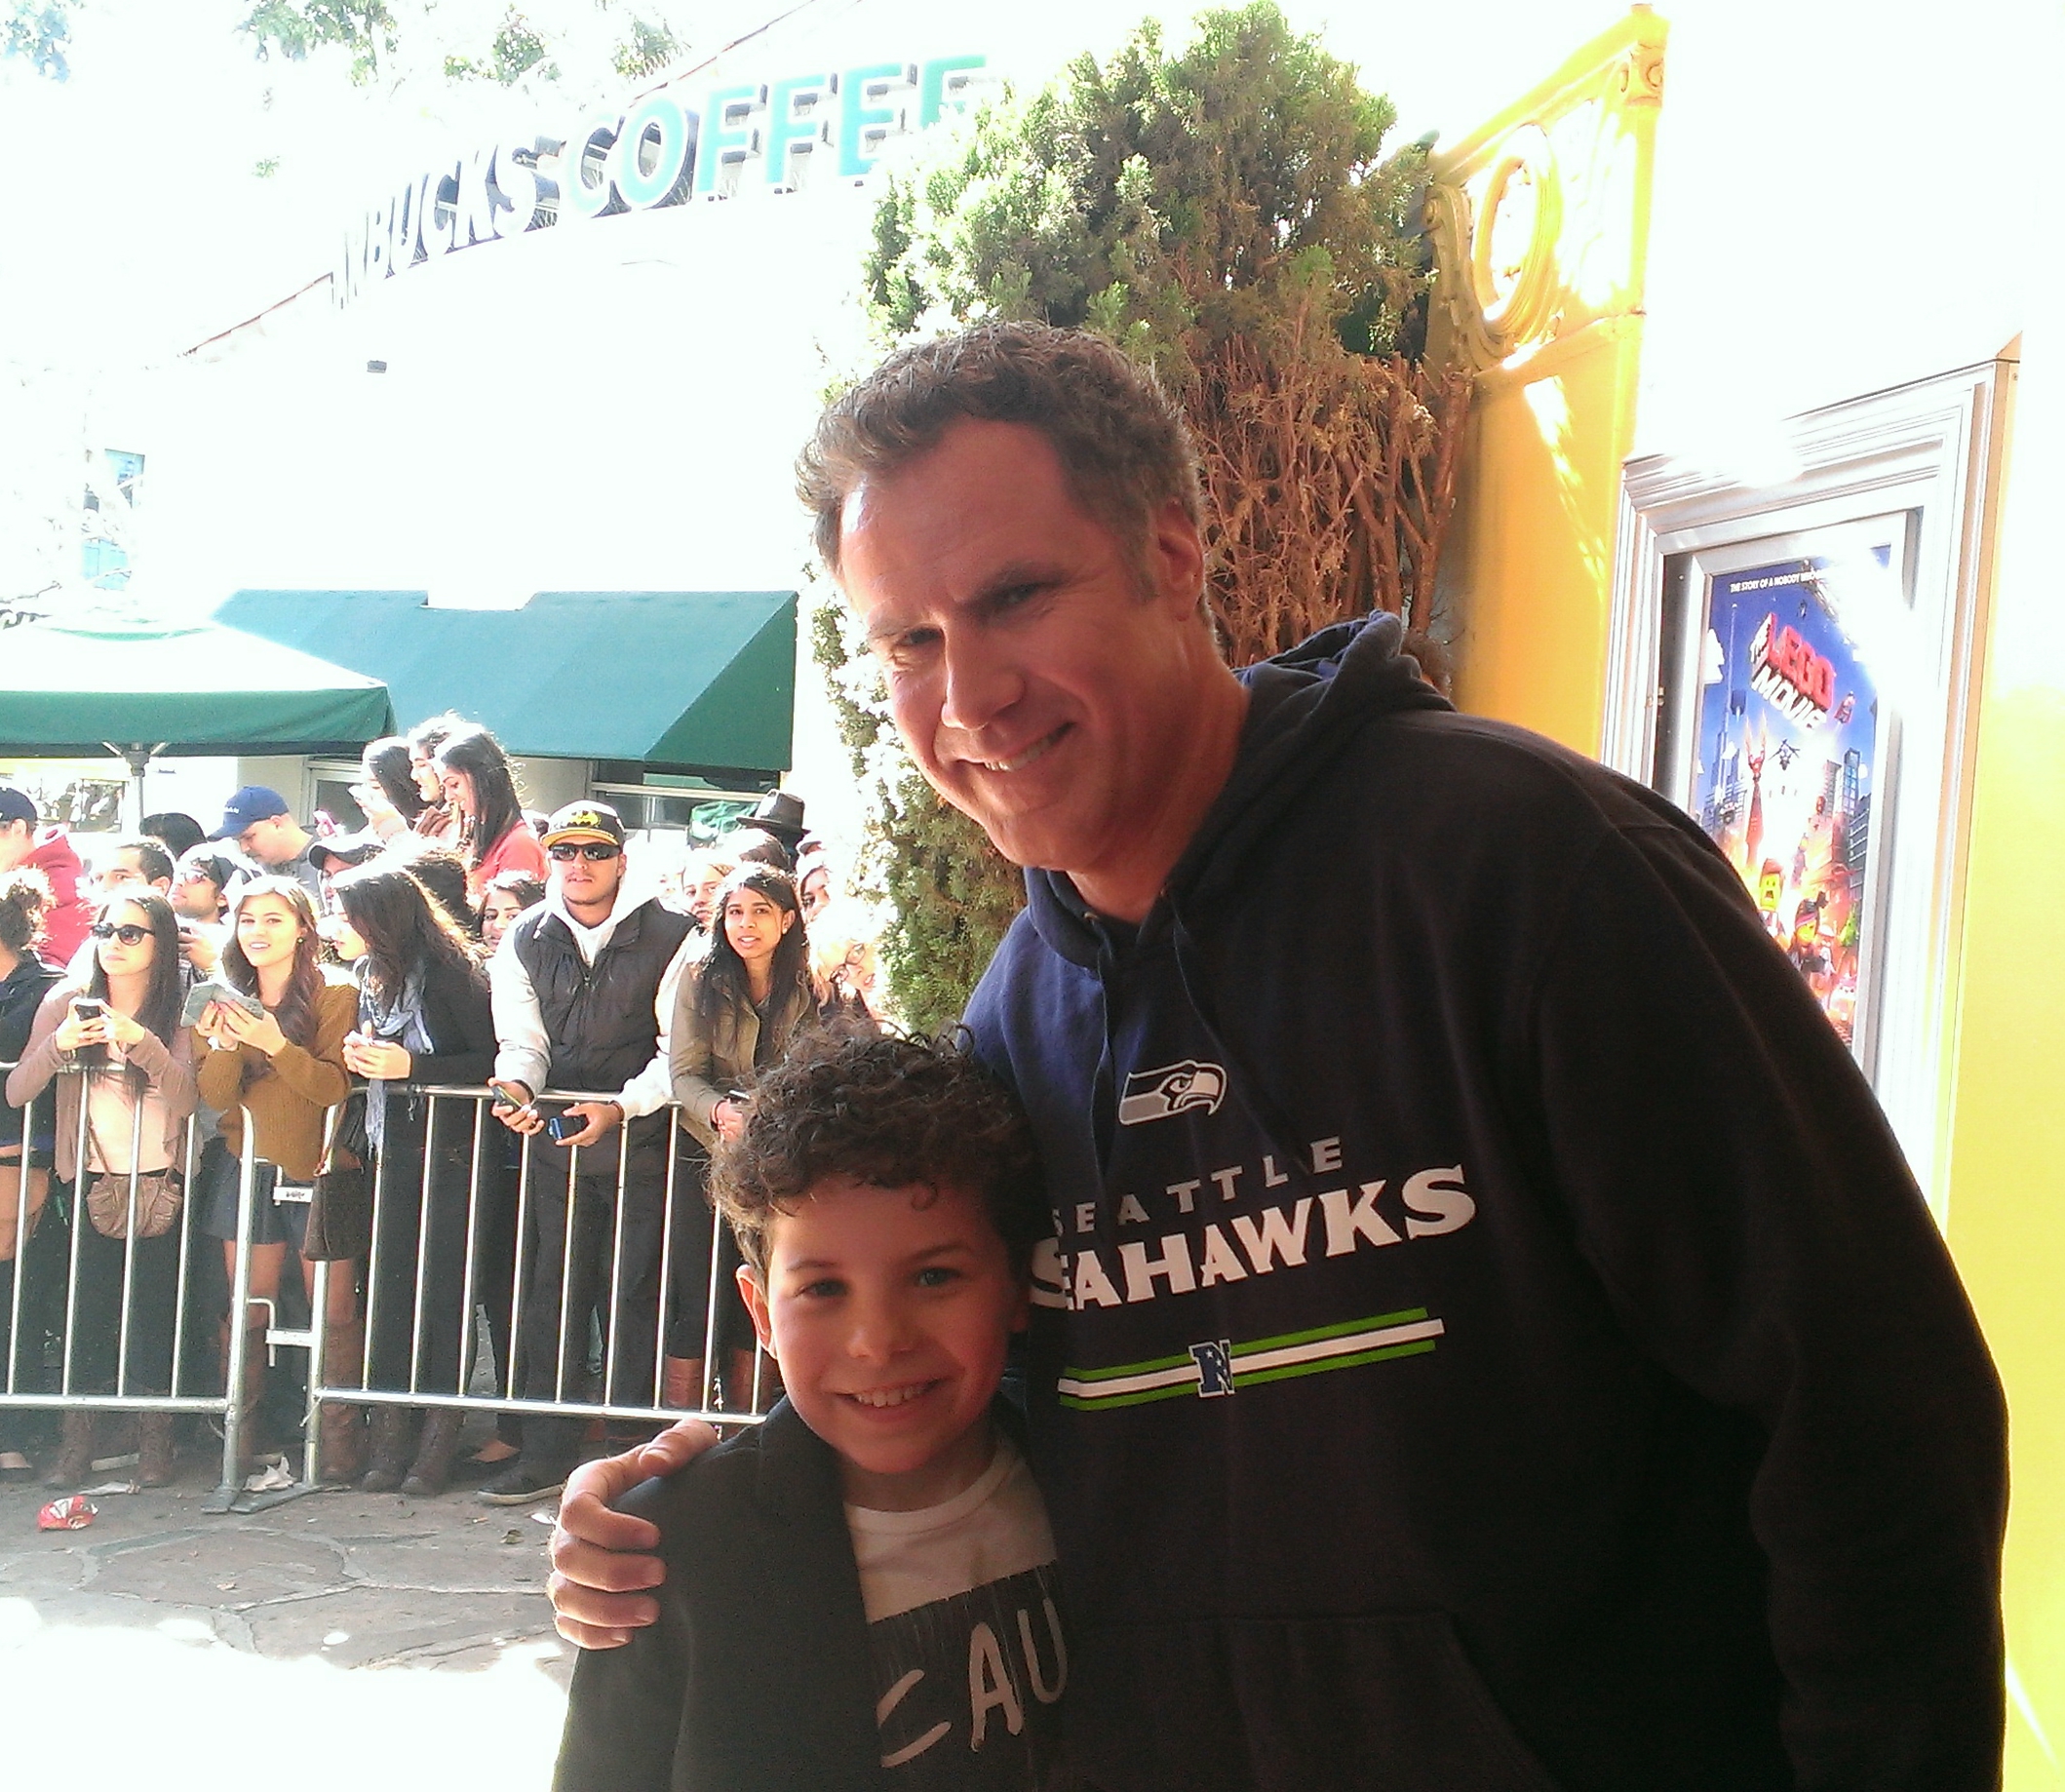 Jadon Sand and Will Ferrell at the Lego Movie premiere.